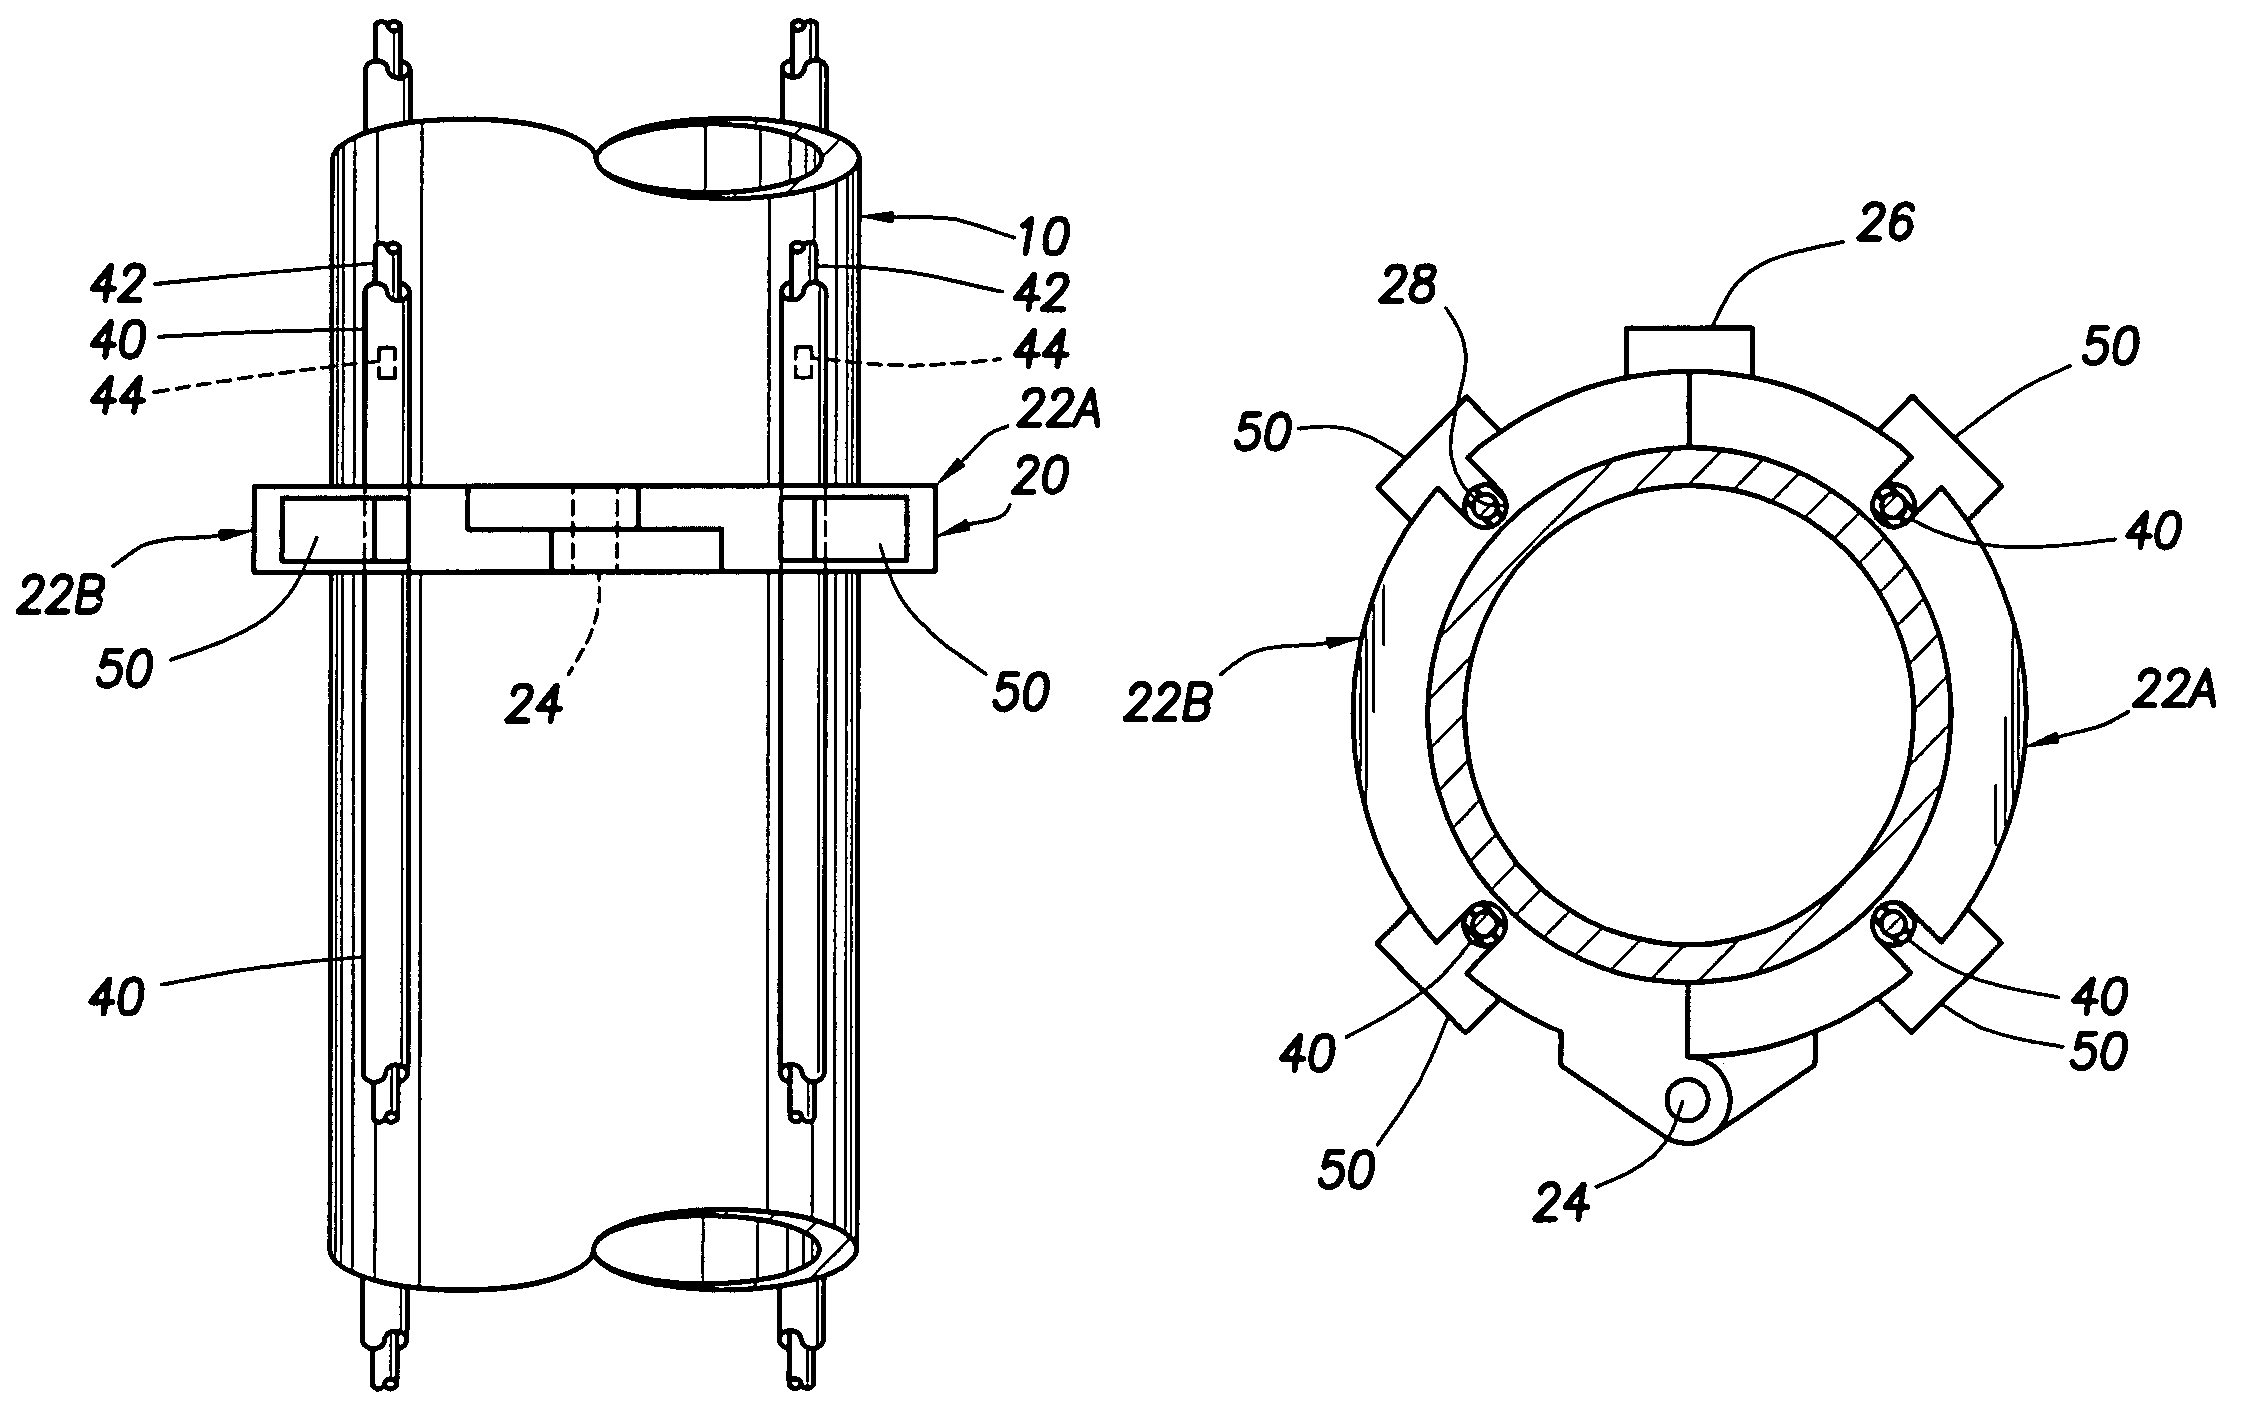 Apparatus and method for retroactively installing sensors on marine elements